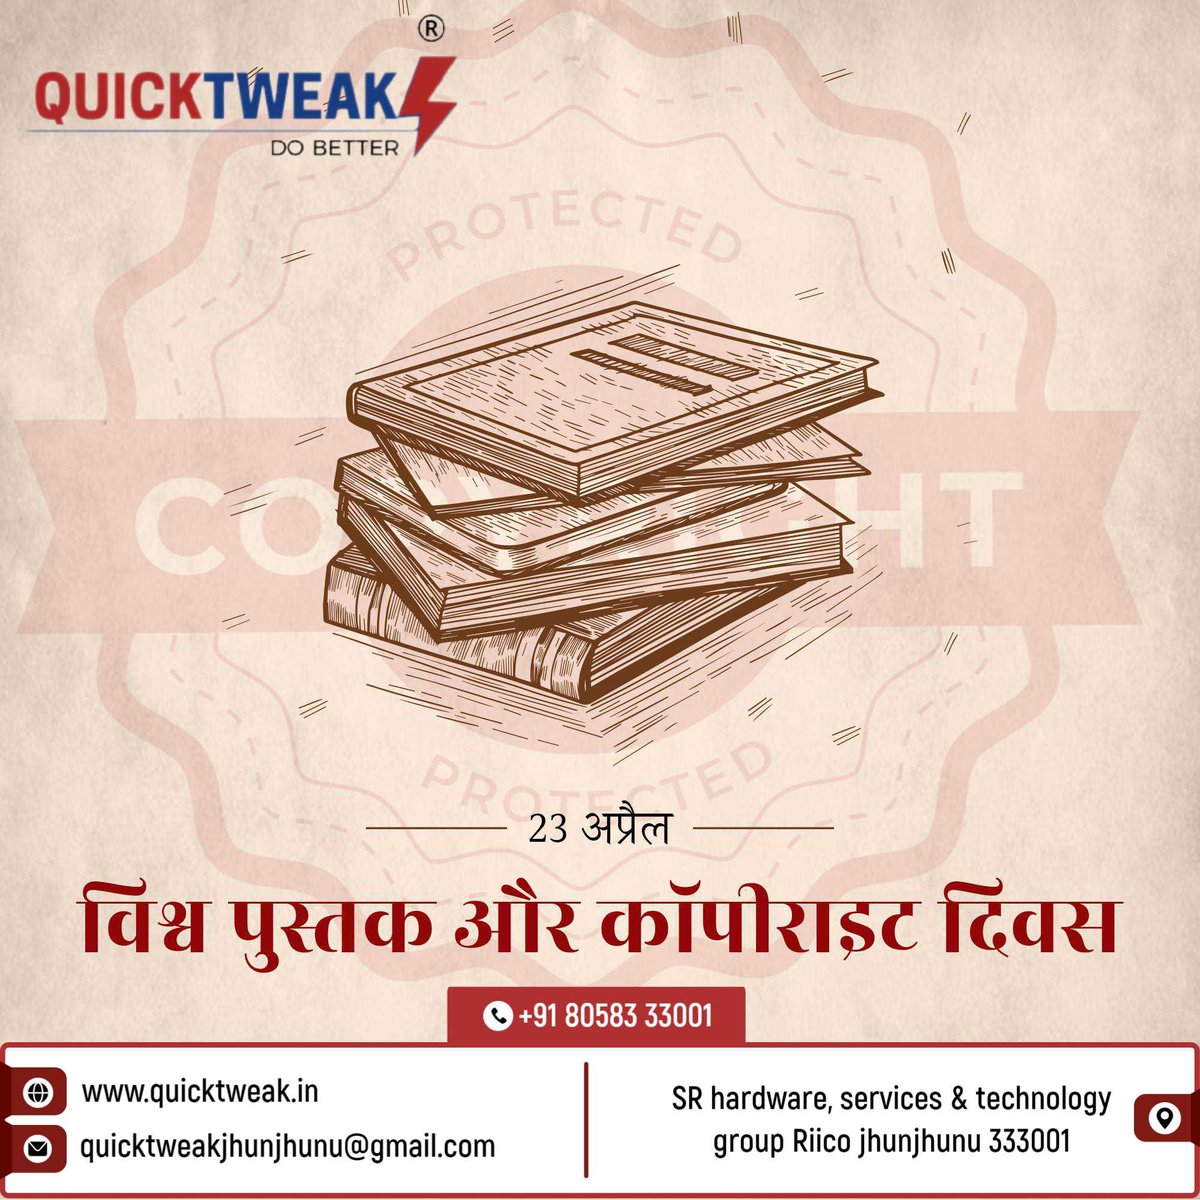 Greetings from QuickTweak
                    #ProtectAuthors #ProtectIntellectualProperty #CopyrightDay #BookObsessed #RespectCopyright #NoPiracy #RespectContentCreators #LoveReading #ReadingList #BooksMatter #quicktweak @QT_331001 @QT_332001